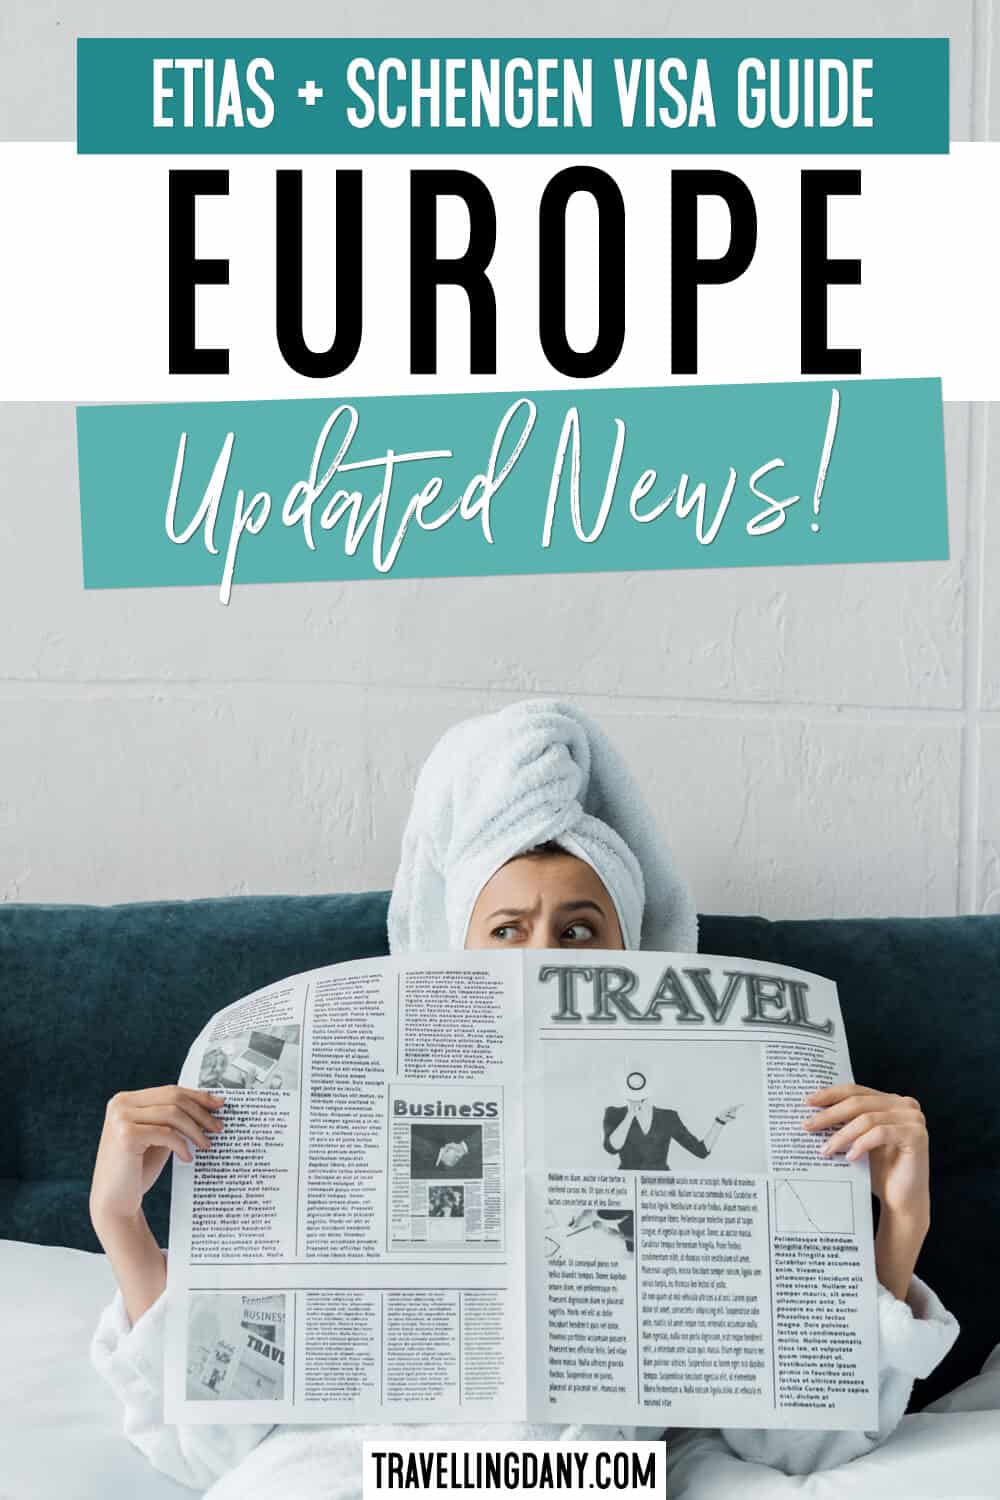 If you want to visit Europe, you will need to be aware of the new rules. Etias visa for Europe, and Schengen visa can be a bit complicated, at first. Which one do you need for your next trip to Europe? What documents do you need? Discover everything you need to know with this easy, free guide!